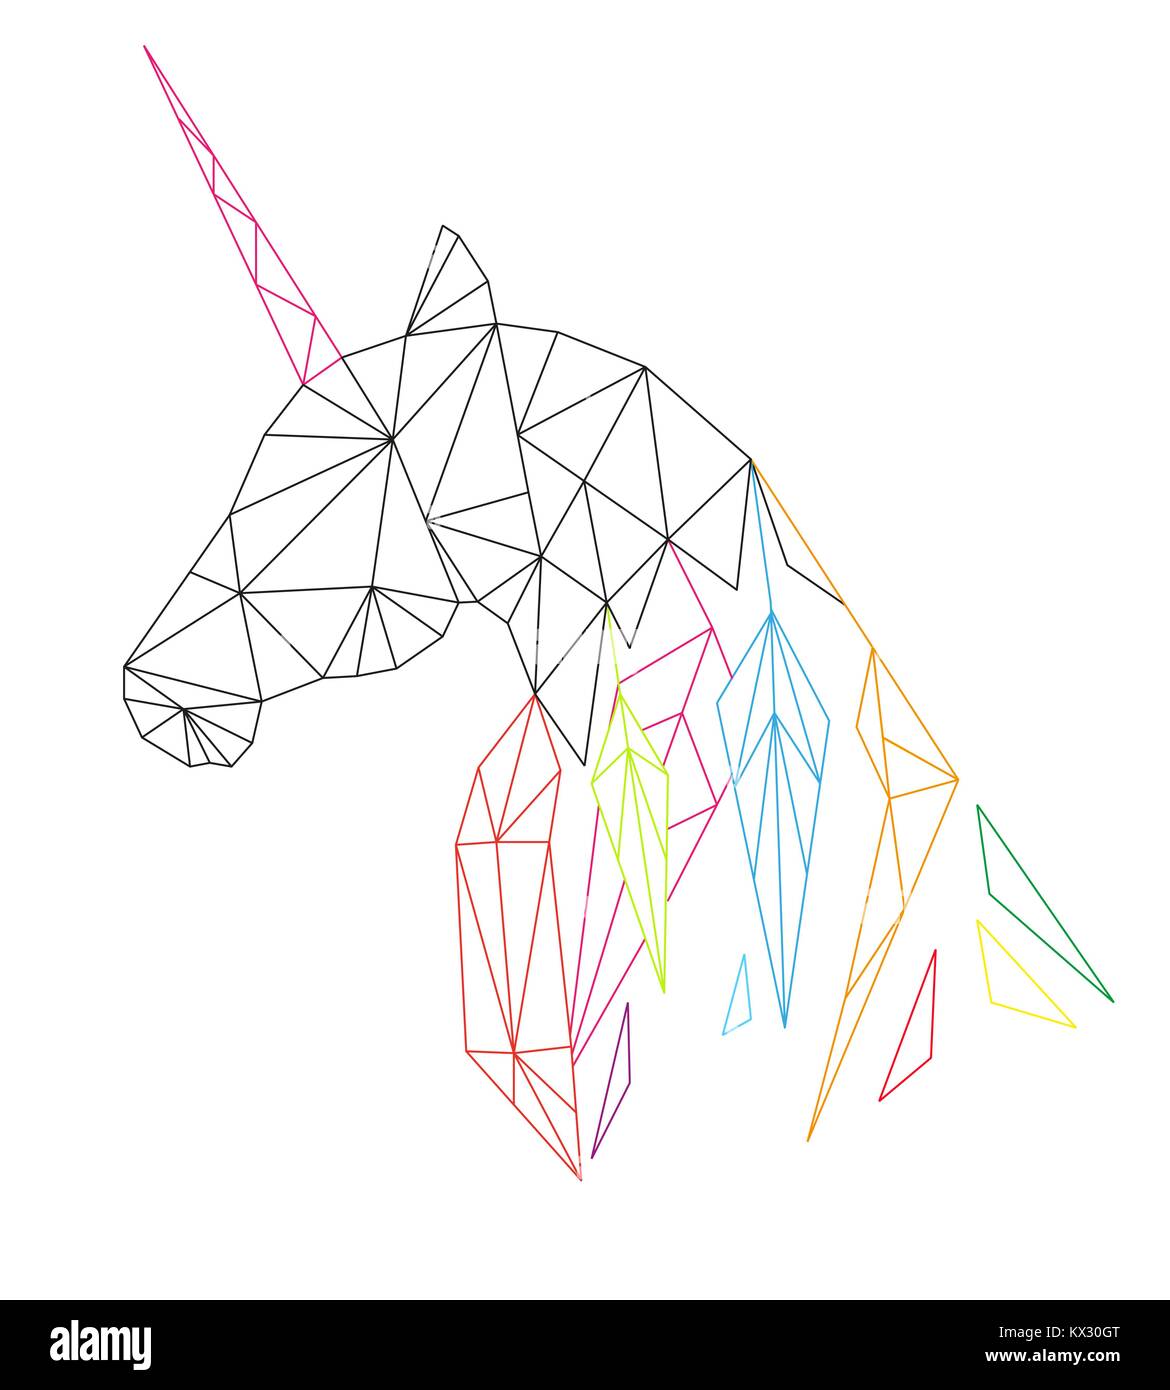 Unicorn's head in the polygonal style. Isolated on white background. Vector illustration. Stock Vector